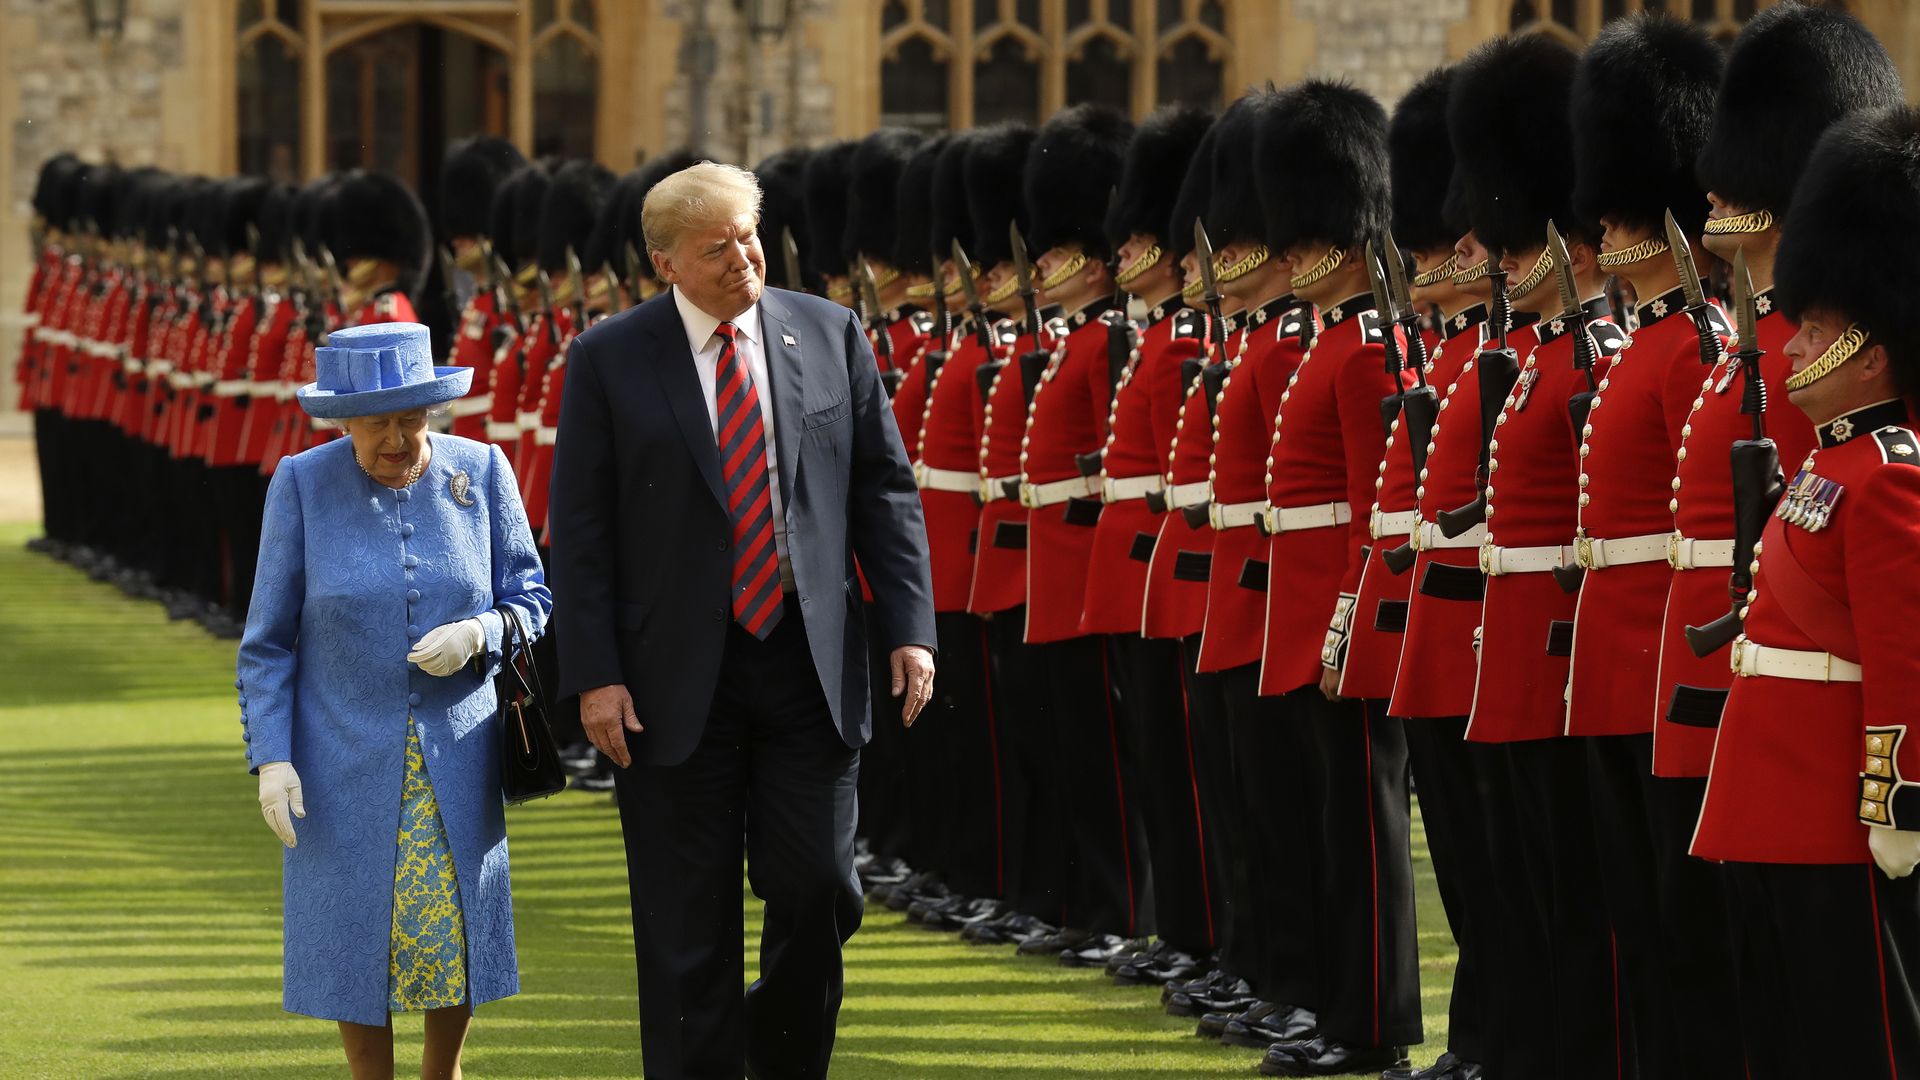 Trump, next to the Queen, walks past a line of guards in British uniform